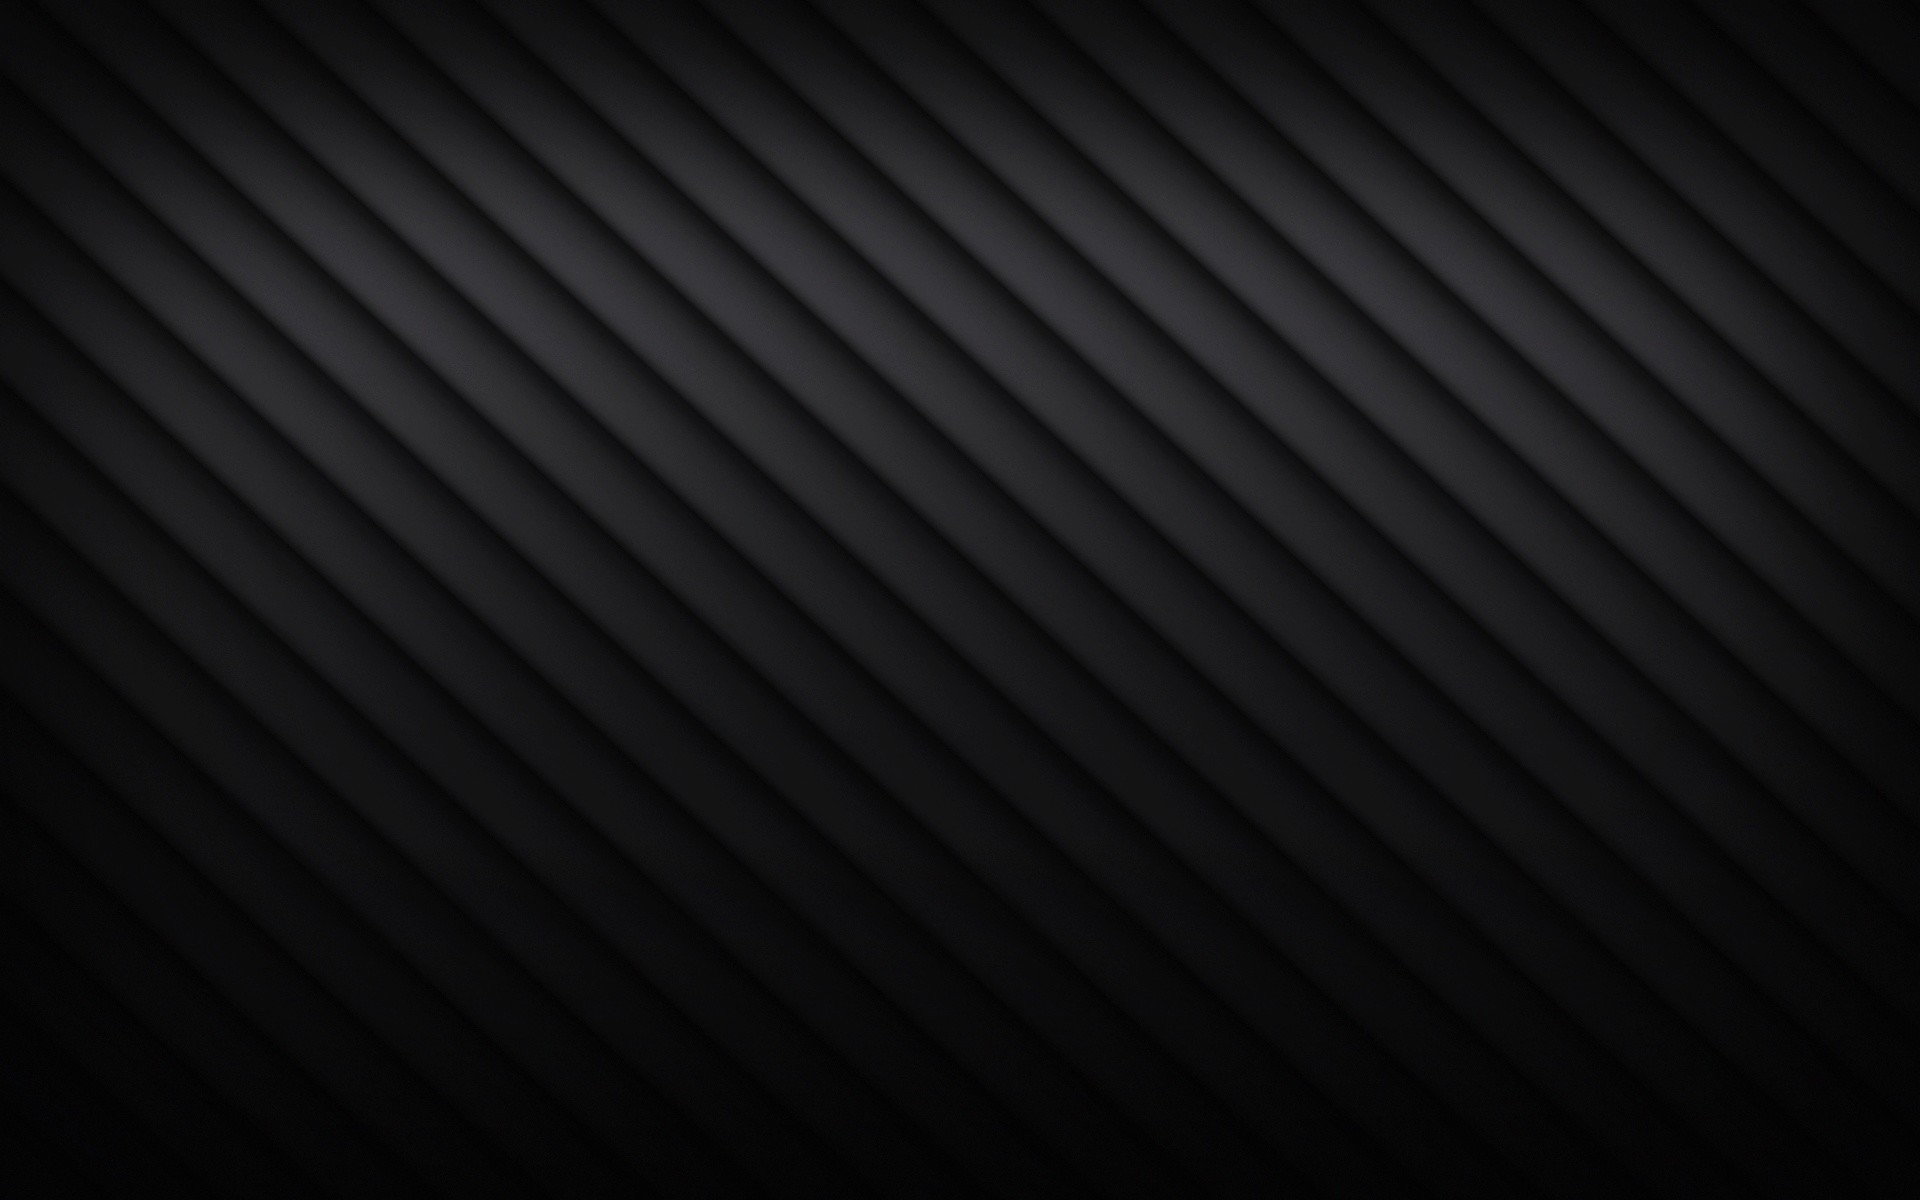 1920x1200 Title : black abstract wallpapers hd download. Dimension : 1920 x 1200.  File Type : JPG/JPEG